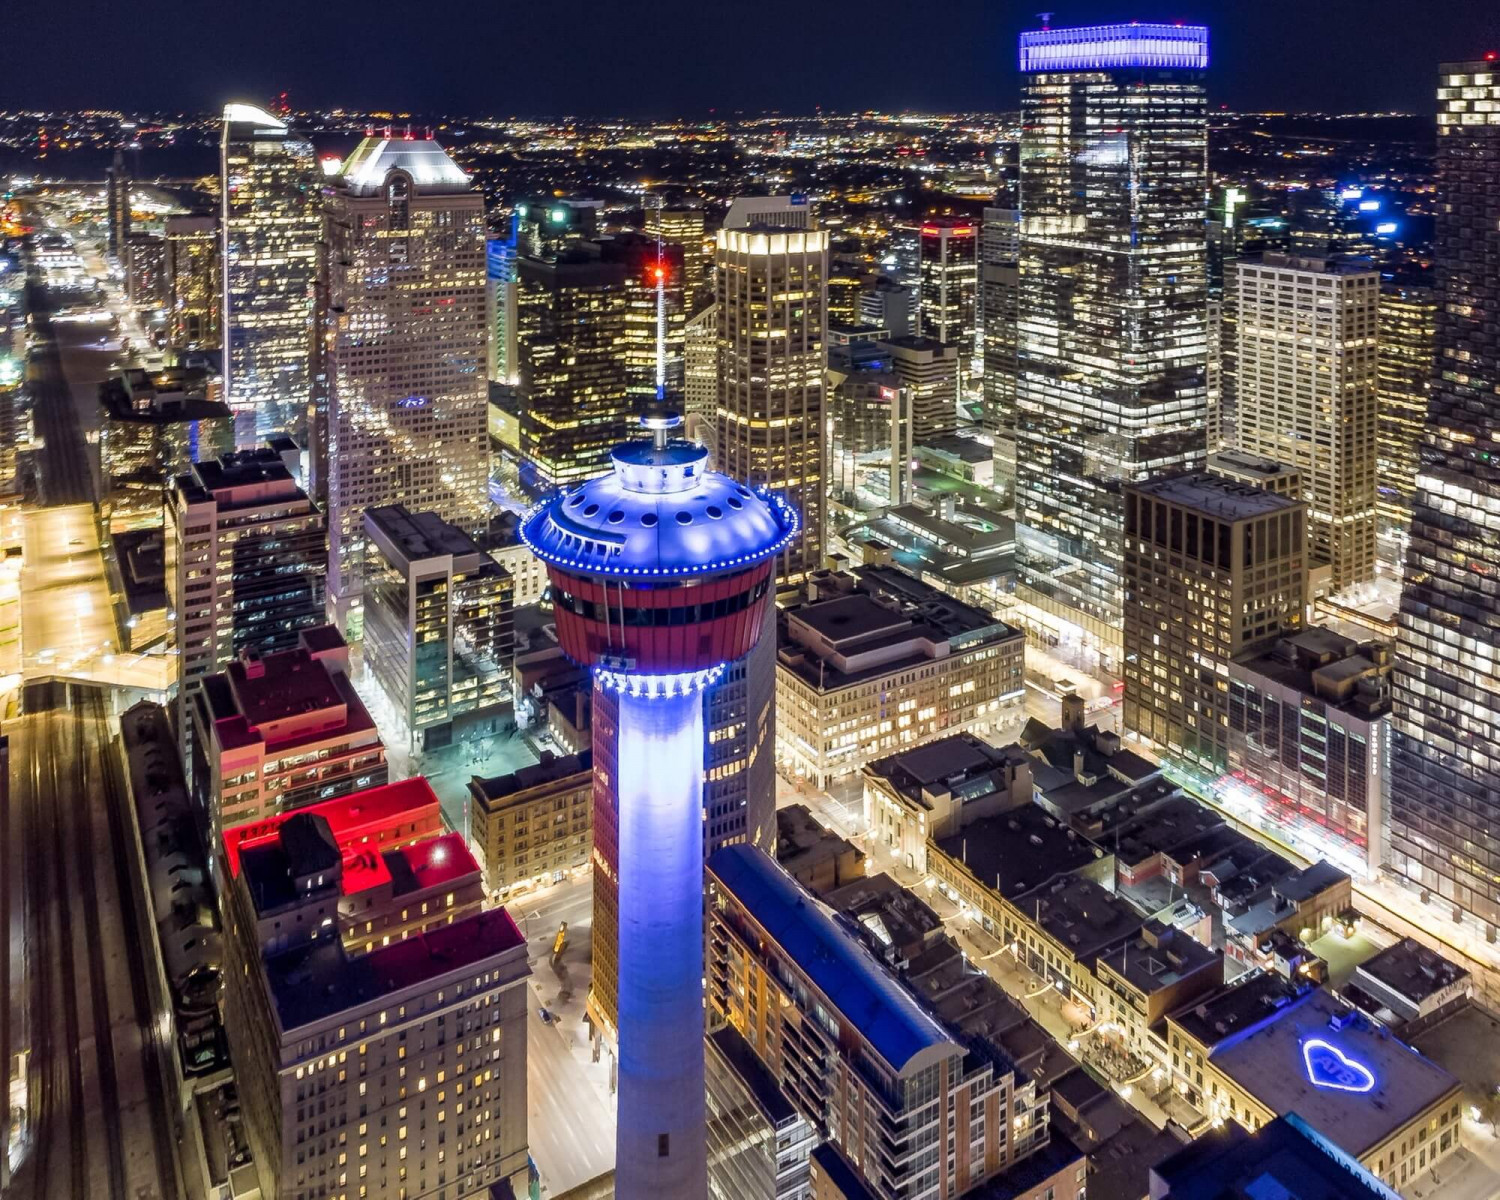 Image captured by a drone of the Calgary Tower